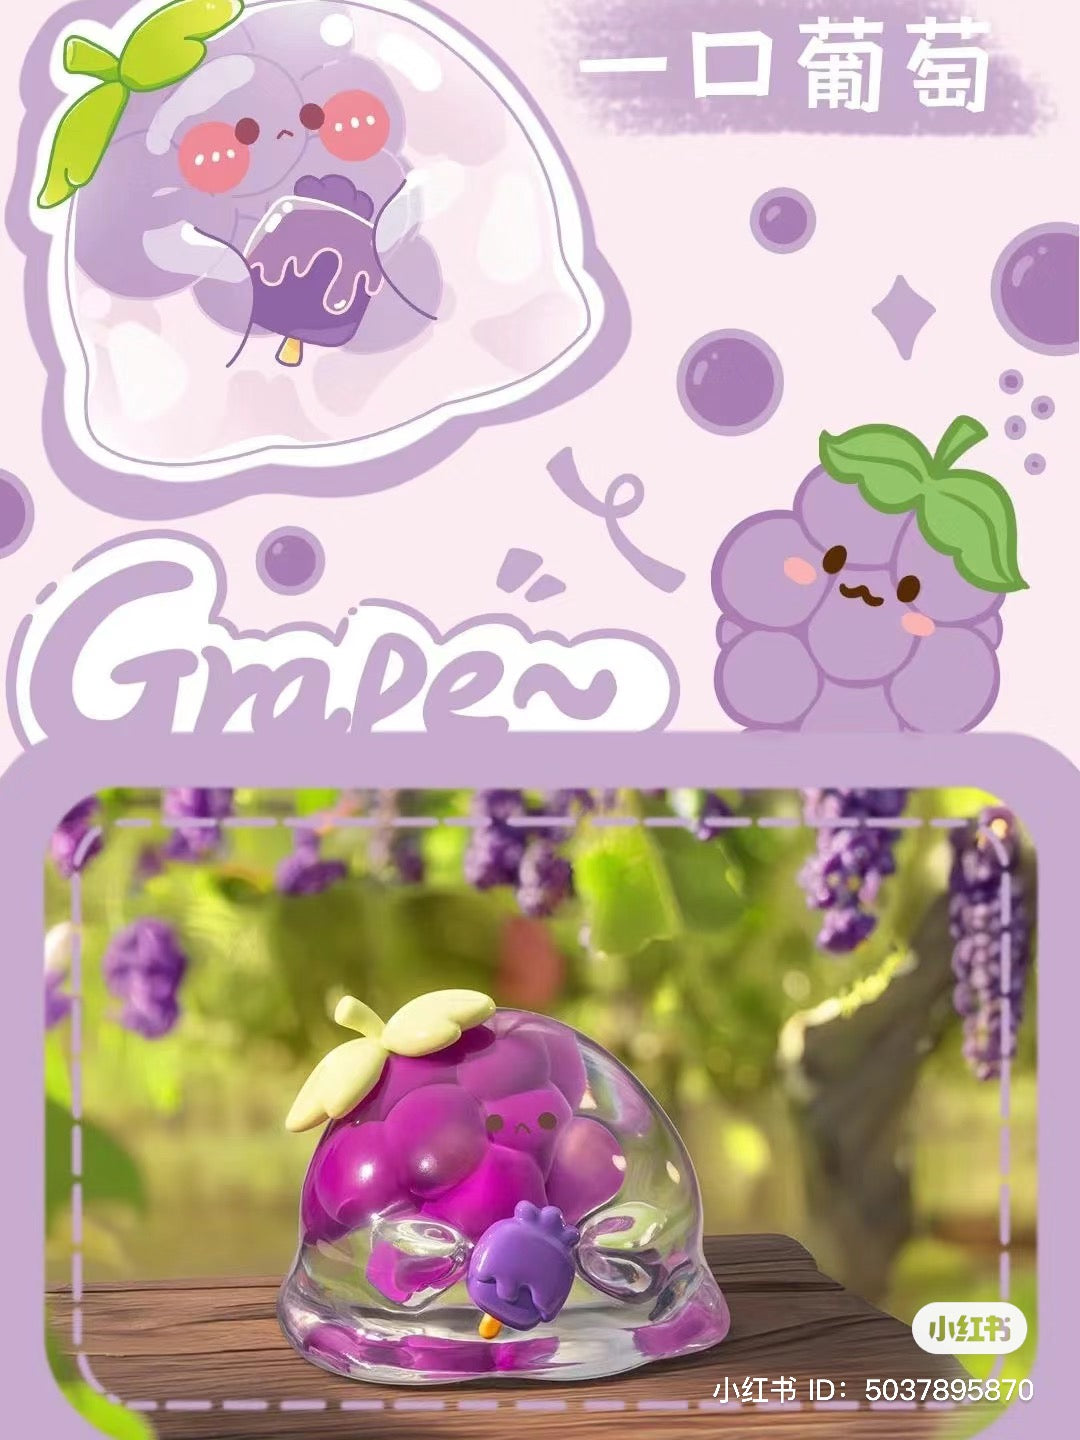 Alt text: Bubble Eggs Colorful Fruit Blind Box featuring purple fruit cartoon in a glass container.